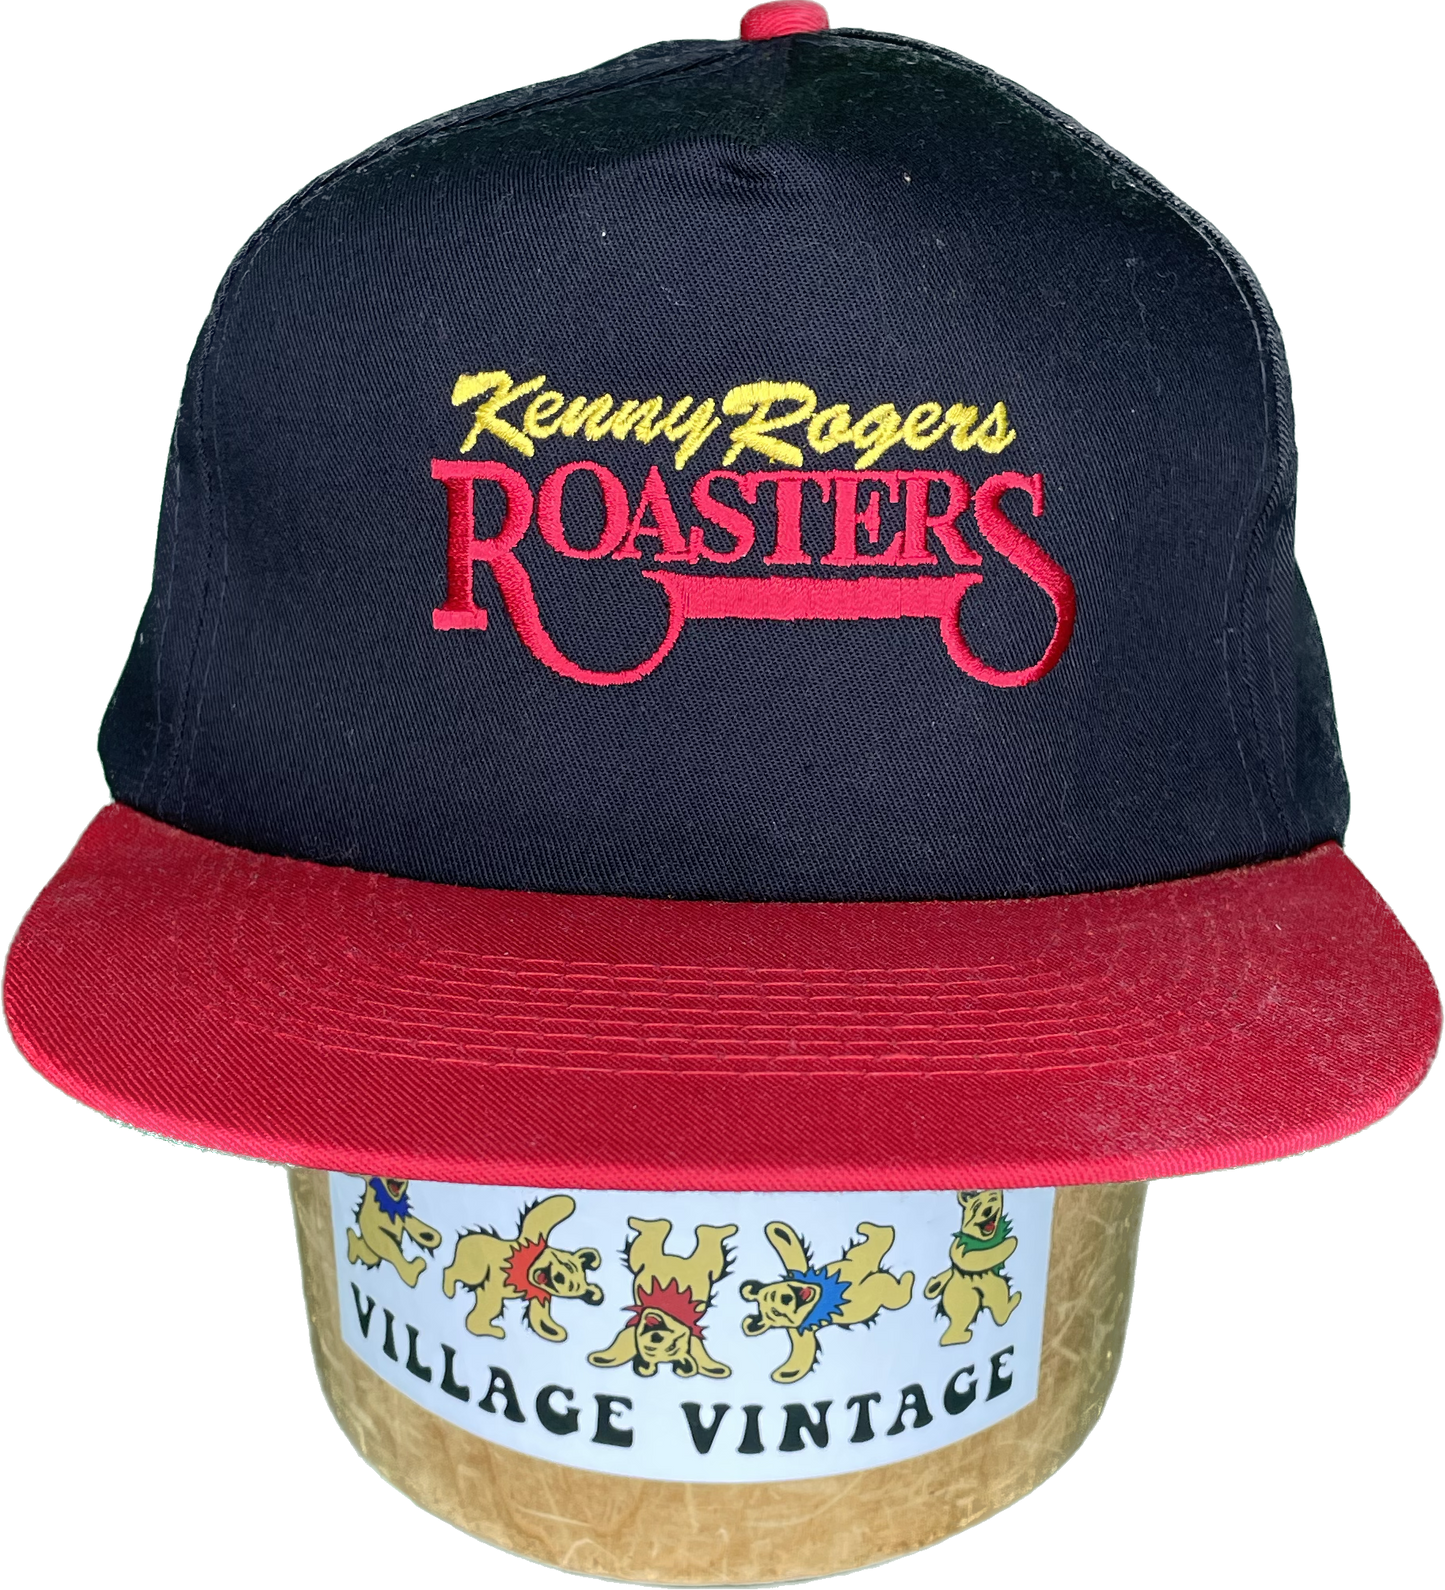 Vintage Kenny Rodgers Roasters Chicken Country Snapback Hat